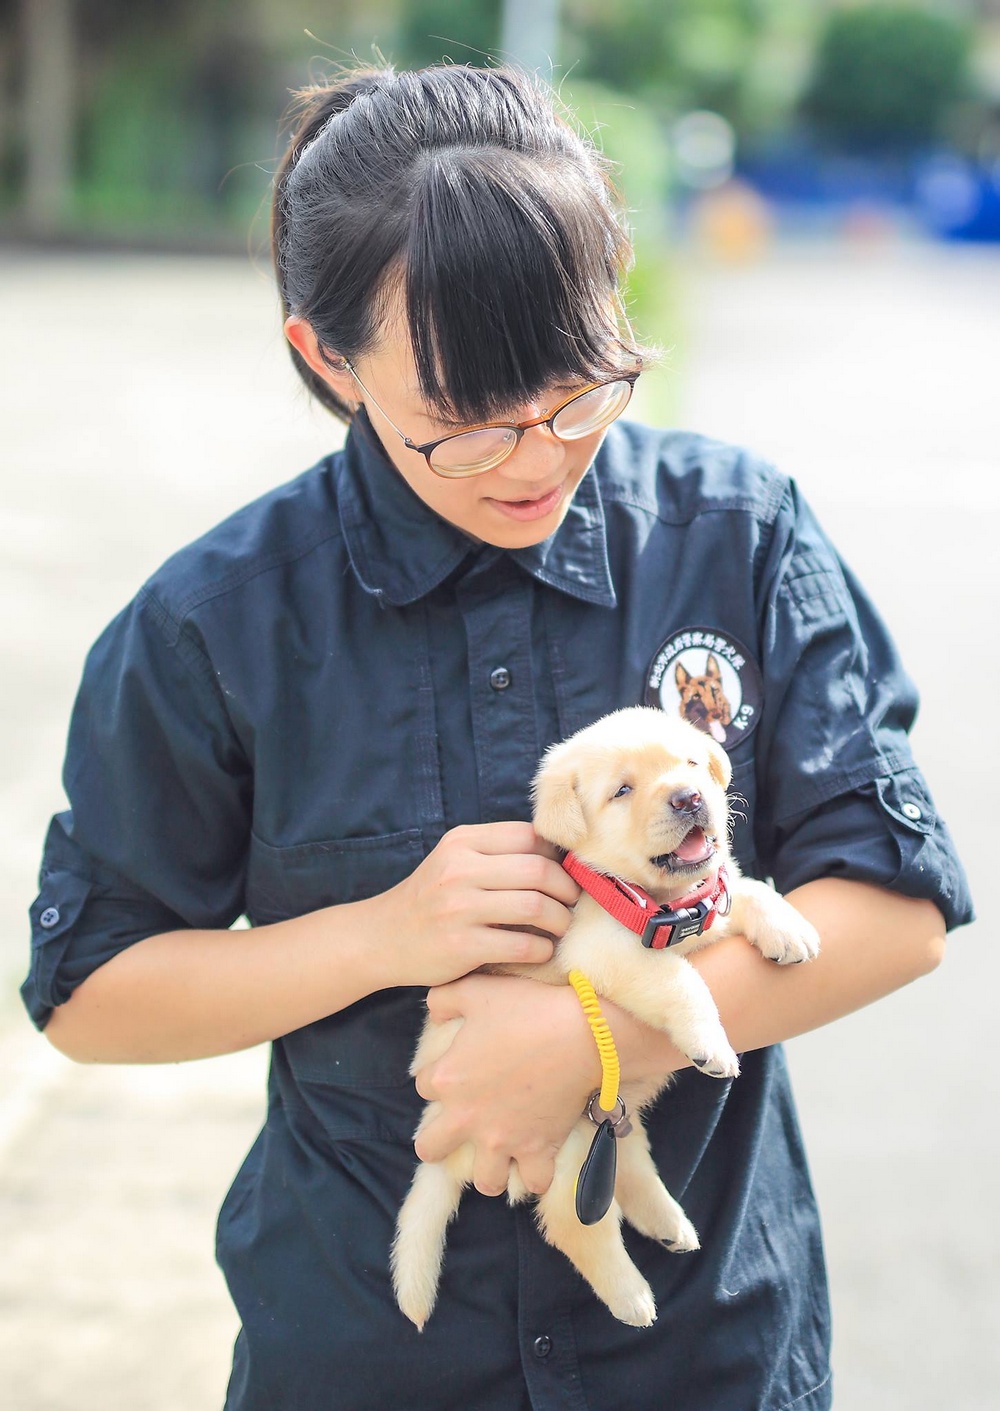 In Taiwan, there were recruits police - Labrador puppies 2